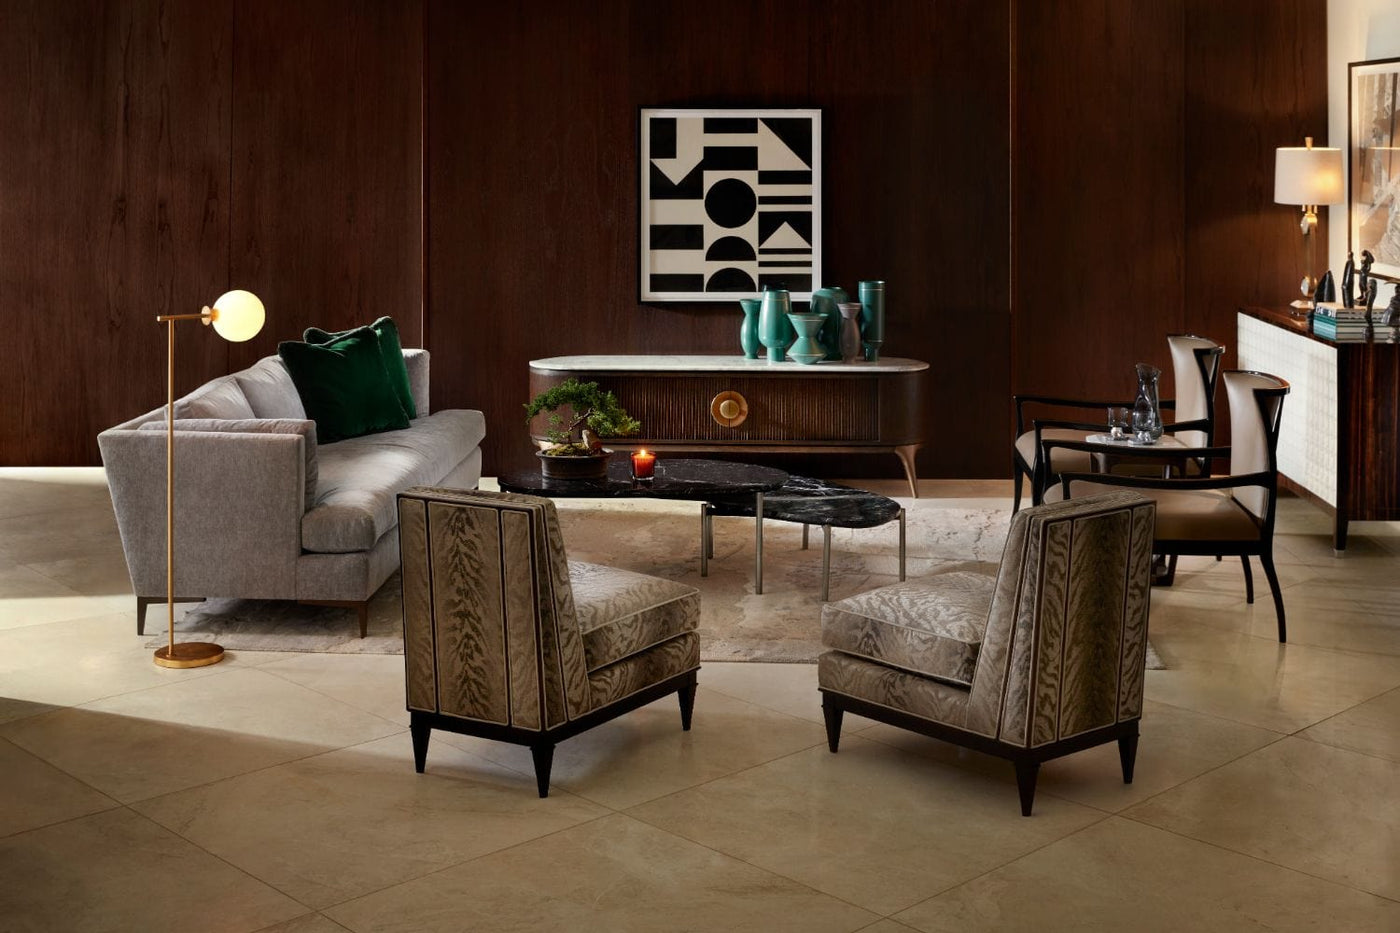 Theodore Alexander Living Converge Marble Accent Table in Cigar Club House of Isabella UK